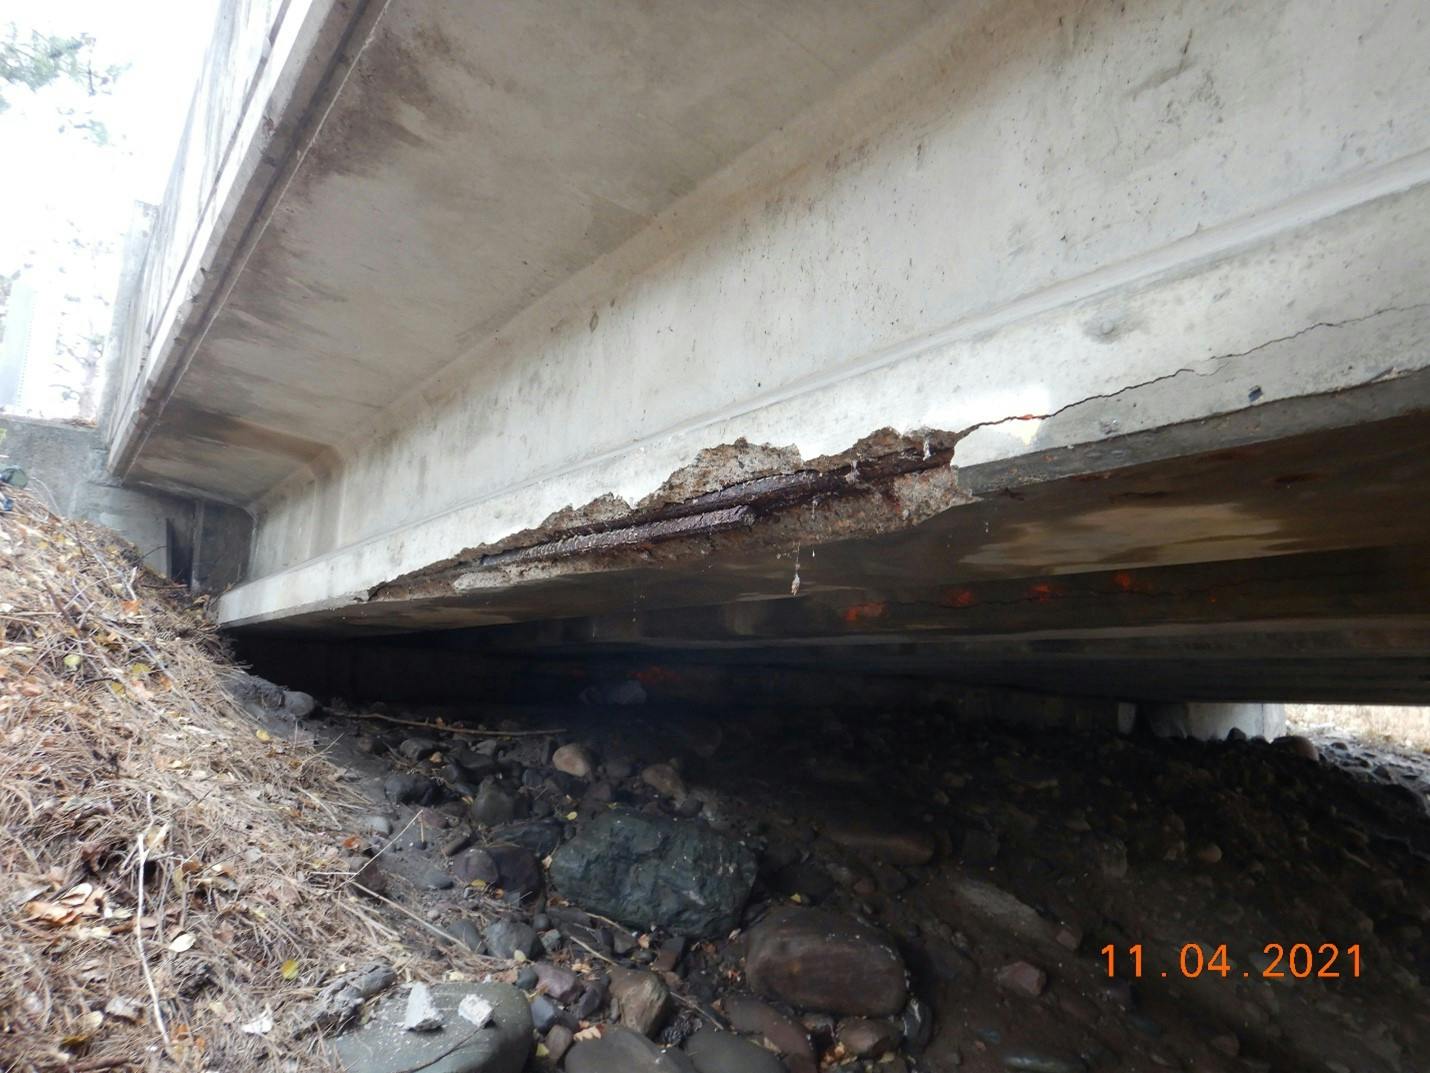 Exposed rebar on one of the prestressed beams